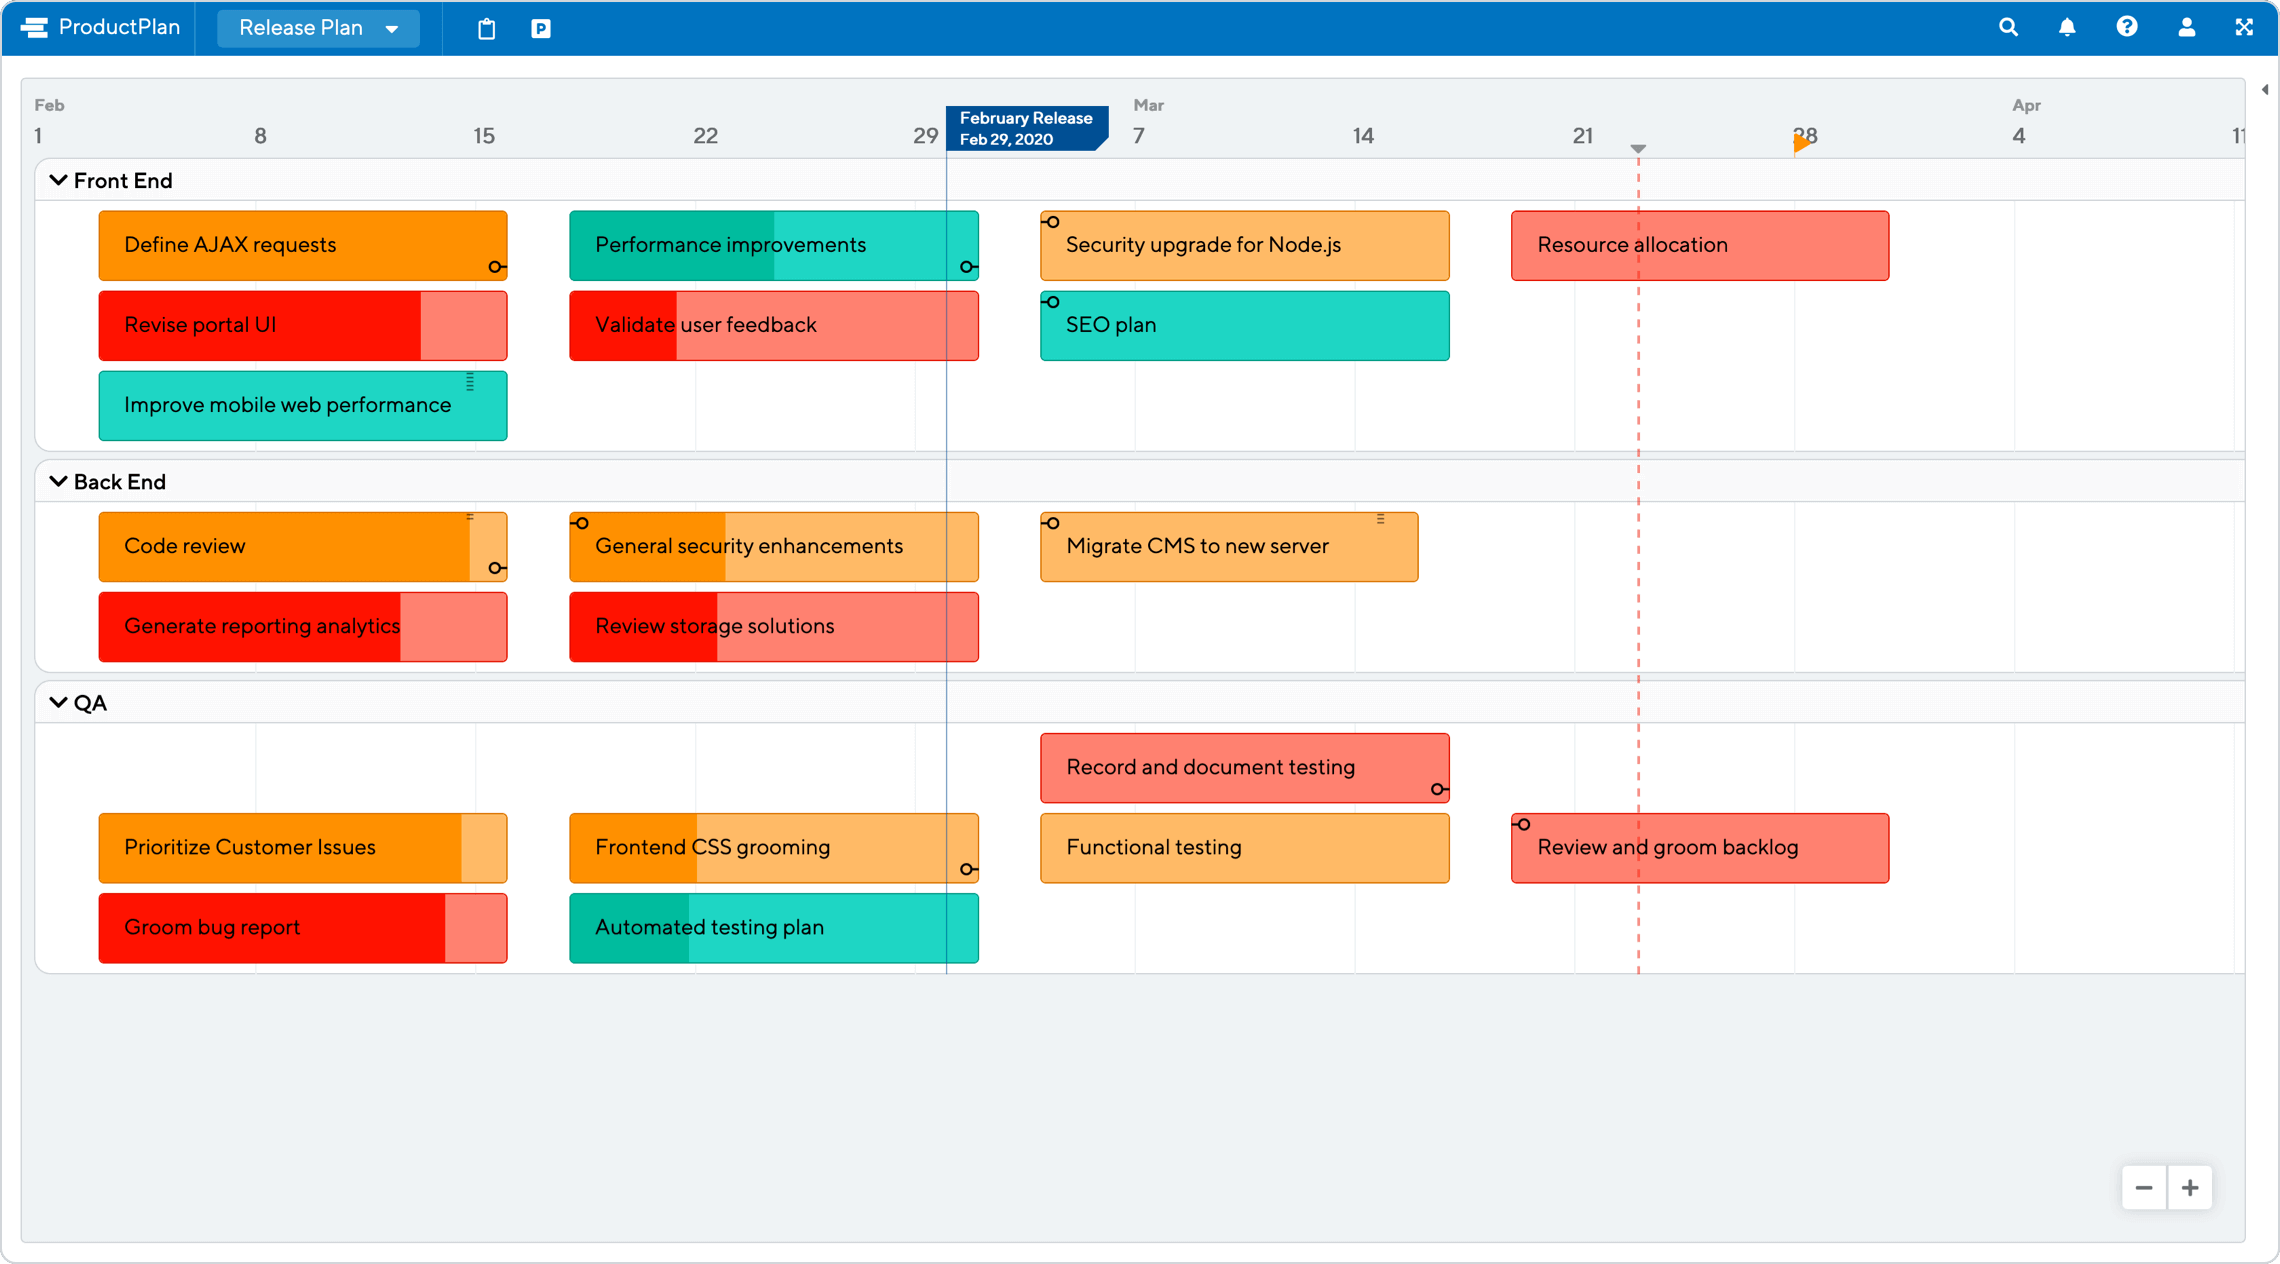 Agile Project Plan Template Excel from www.productplan.com